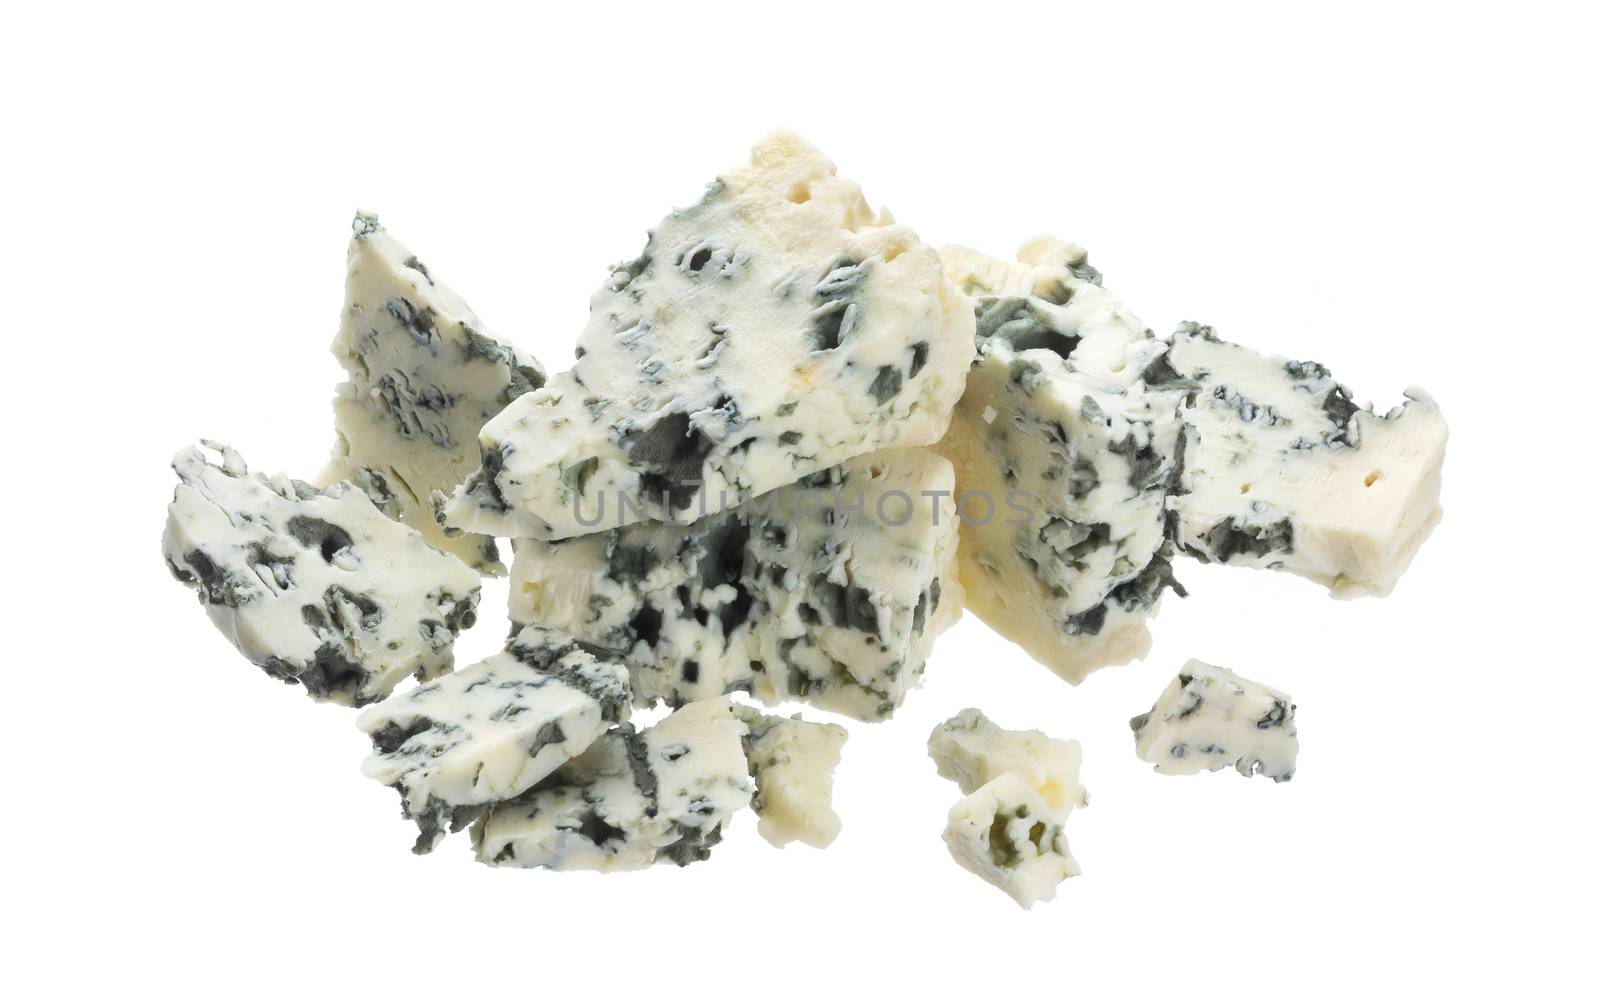 Danish blue cheese isolated on white background with clipping path by xamtiw